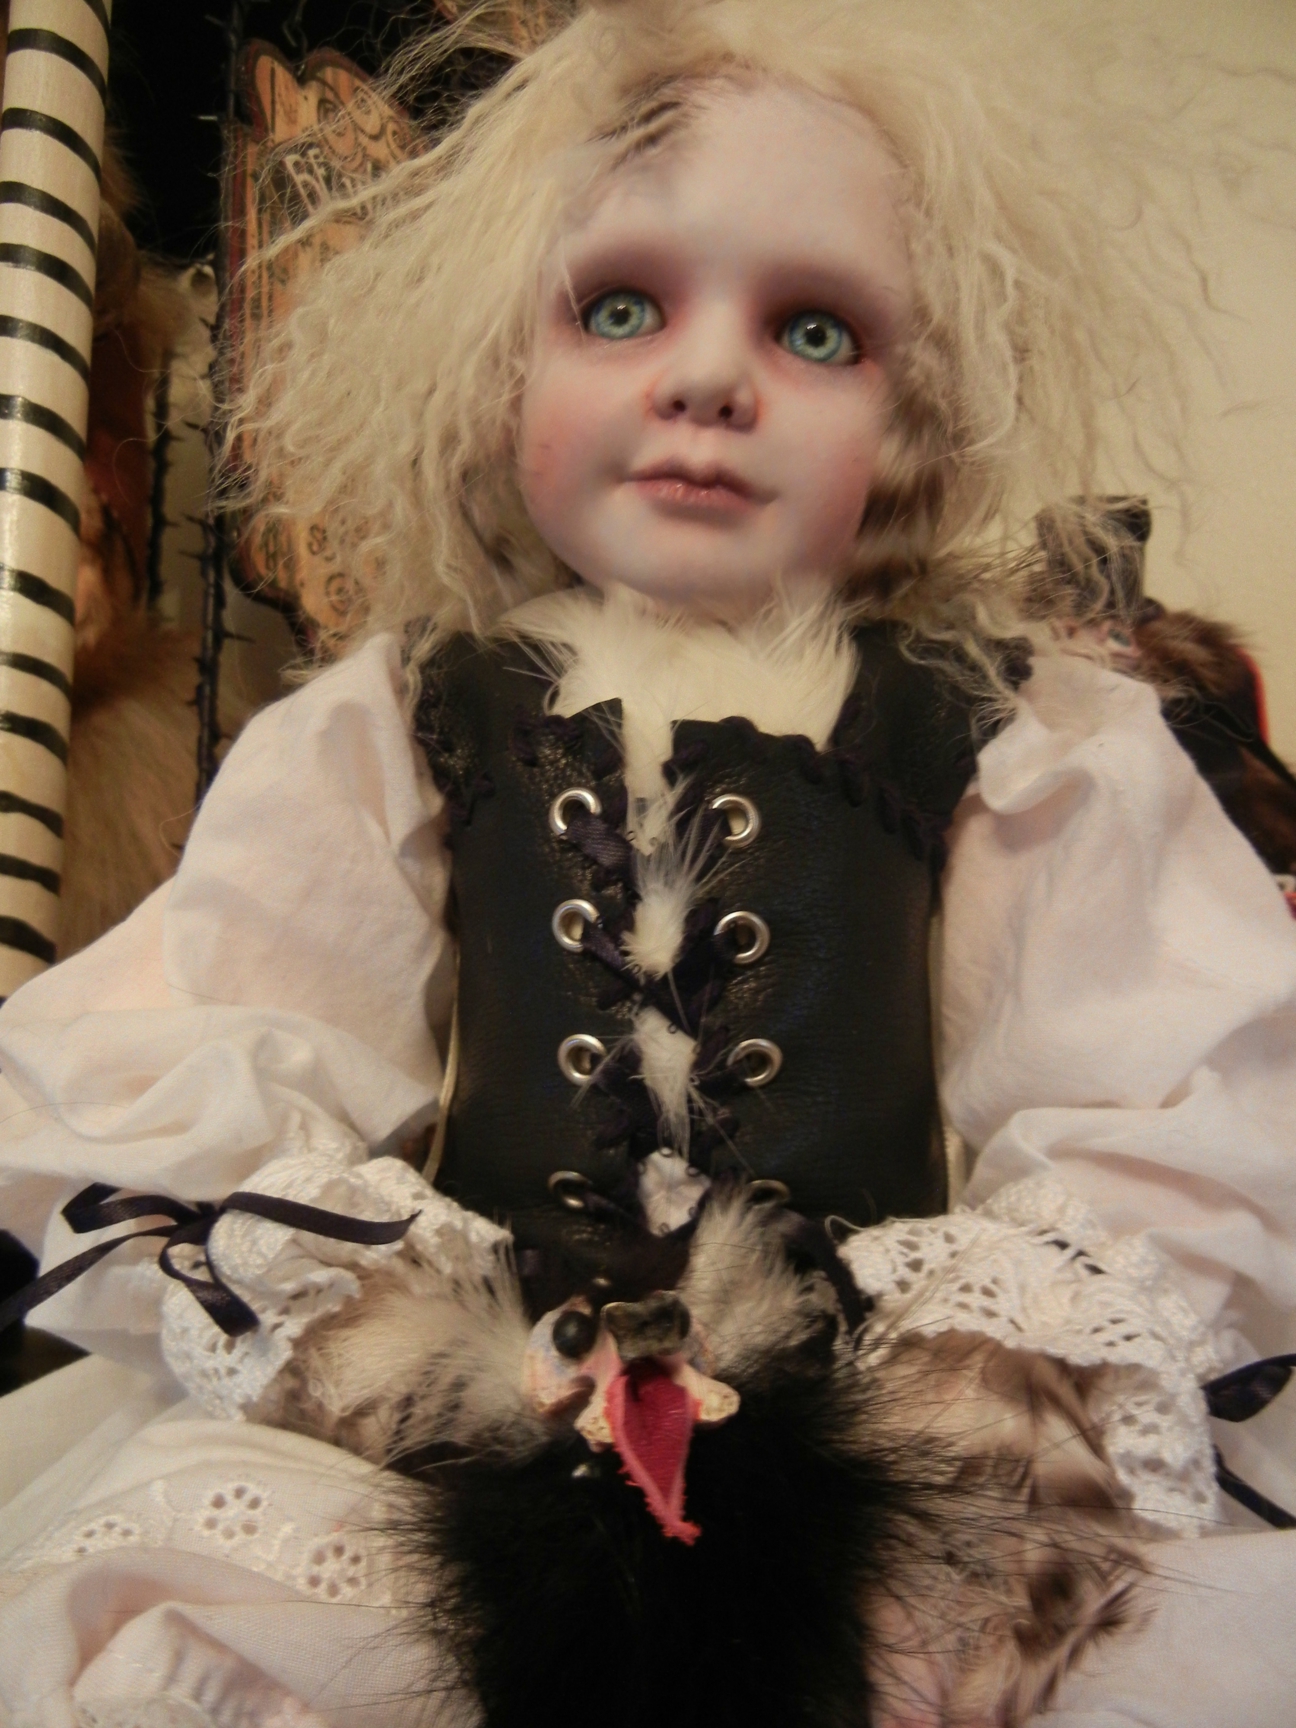 seated gothic artdoll pale with light eyes and blond hair wearing black beret, white shirt with lace cuffs, leather vest, taxidermy chicken feet holds a feathered pet creature in his lap